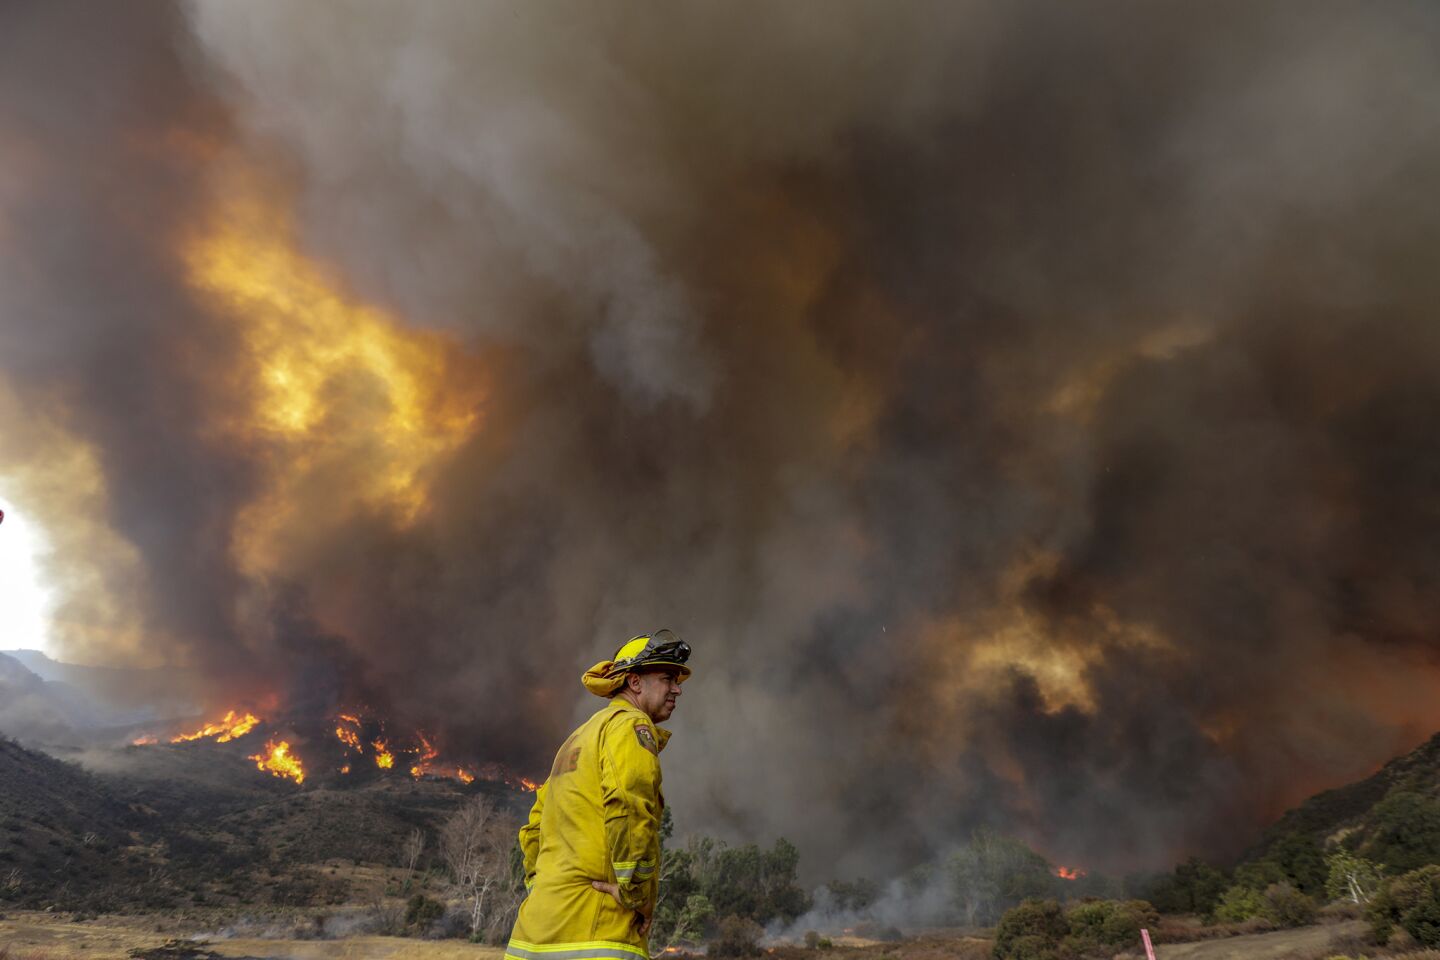 Cal Fire's Mario Gonzalez keeps an eye on the Holy fire raging near homes in Leach Canyon.